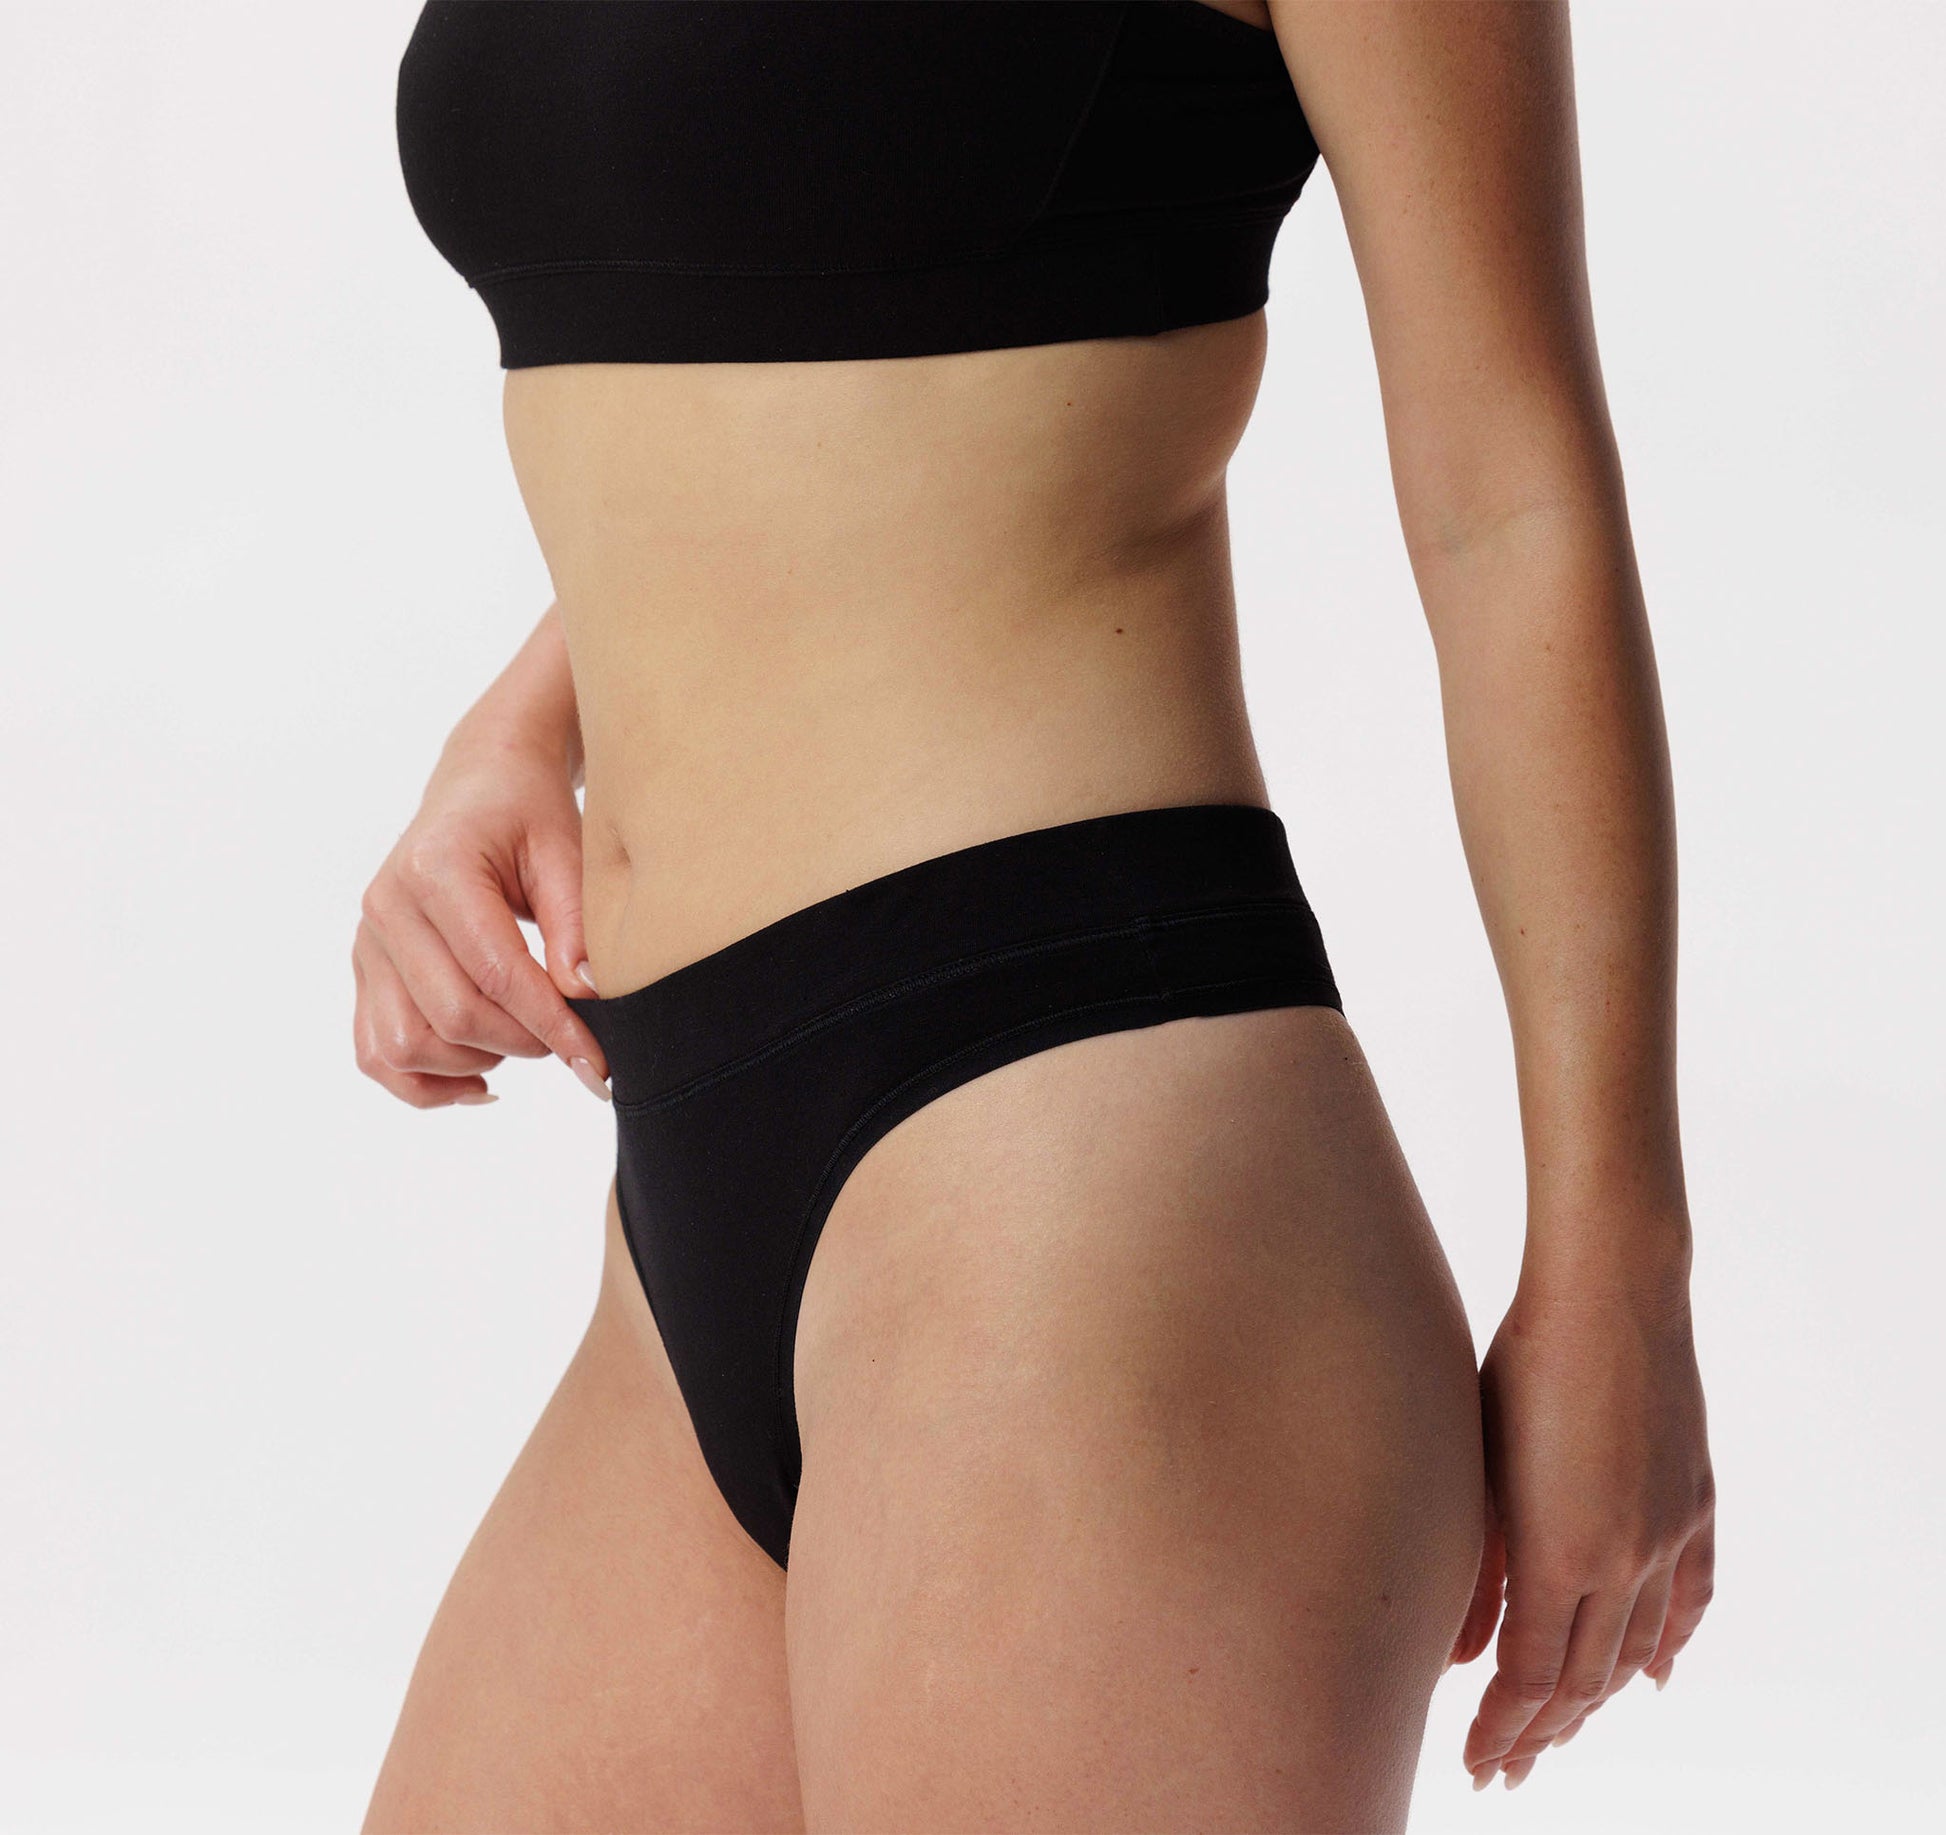 2 pack of black high waist knickers in organic cotton